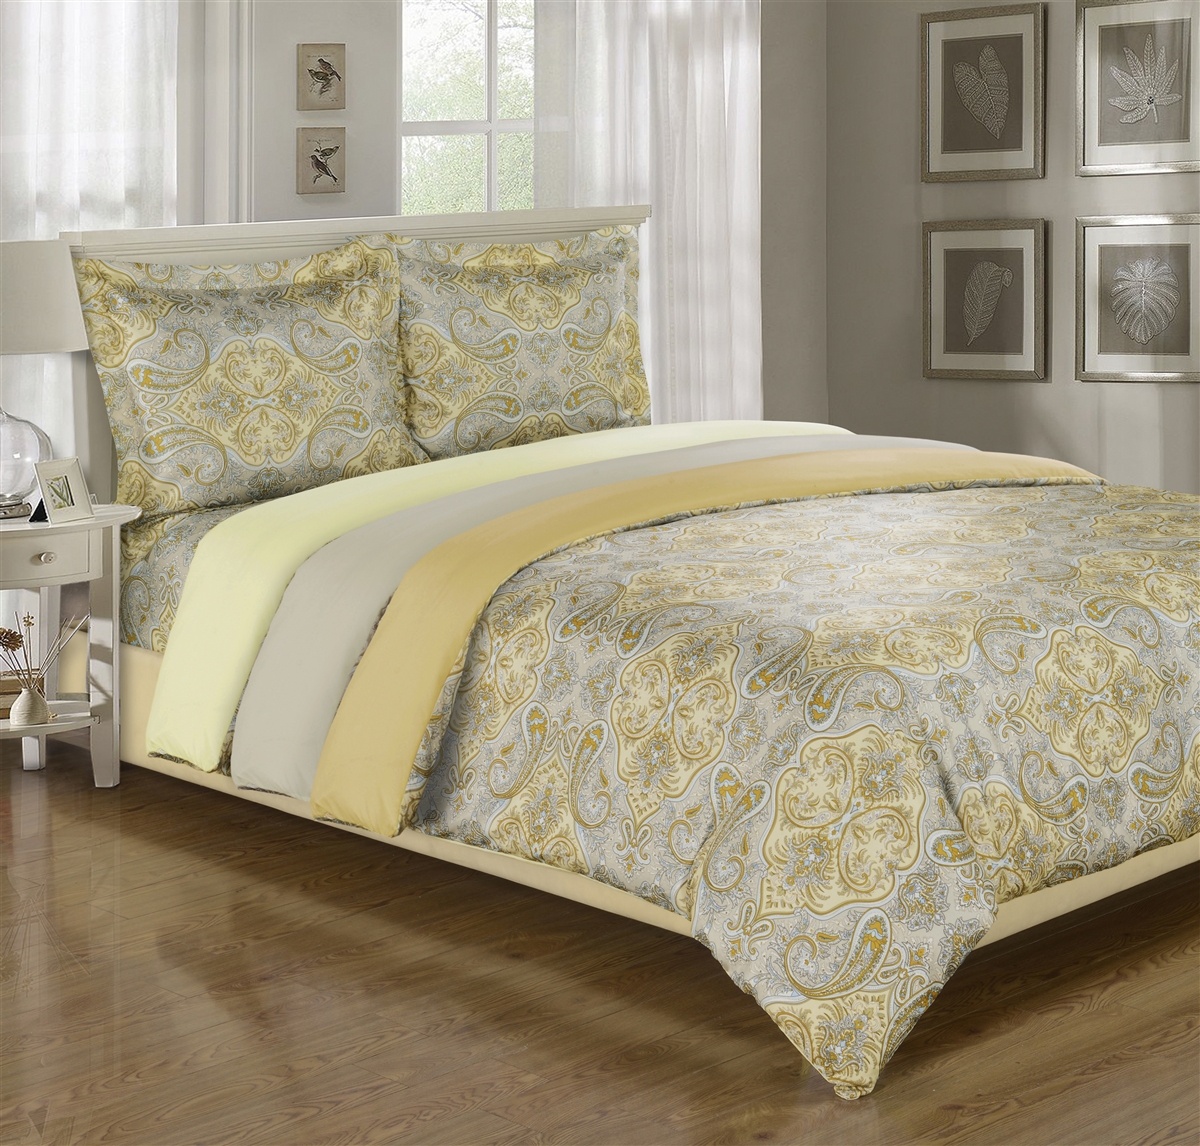 Golinens Luxury Gold And Silver Themed Paisley Design Wrinkle Free